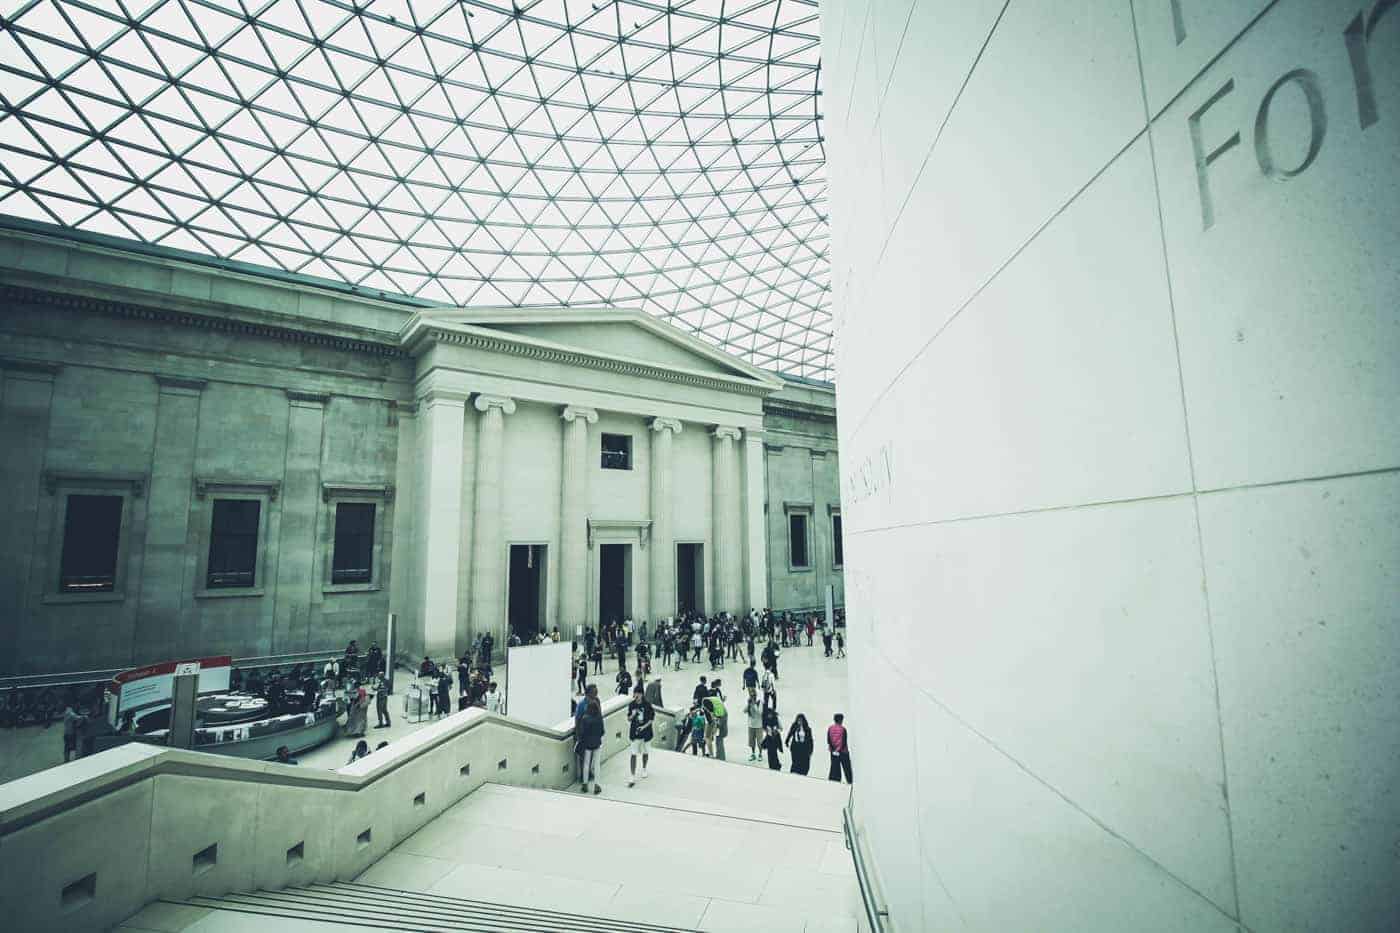 Geometric patterns line the ceiling of the airy entrance to The British Museum